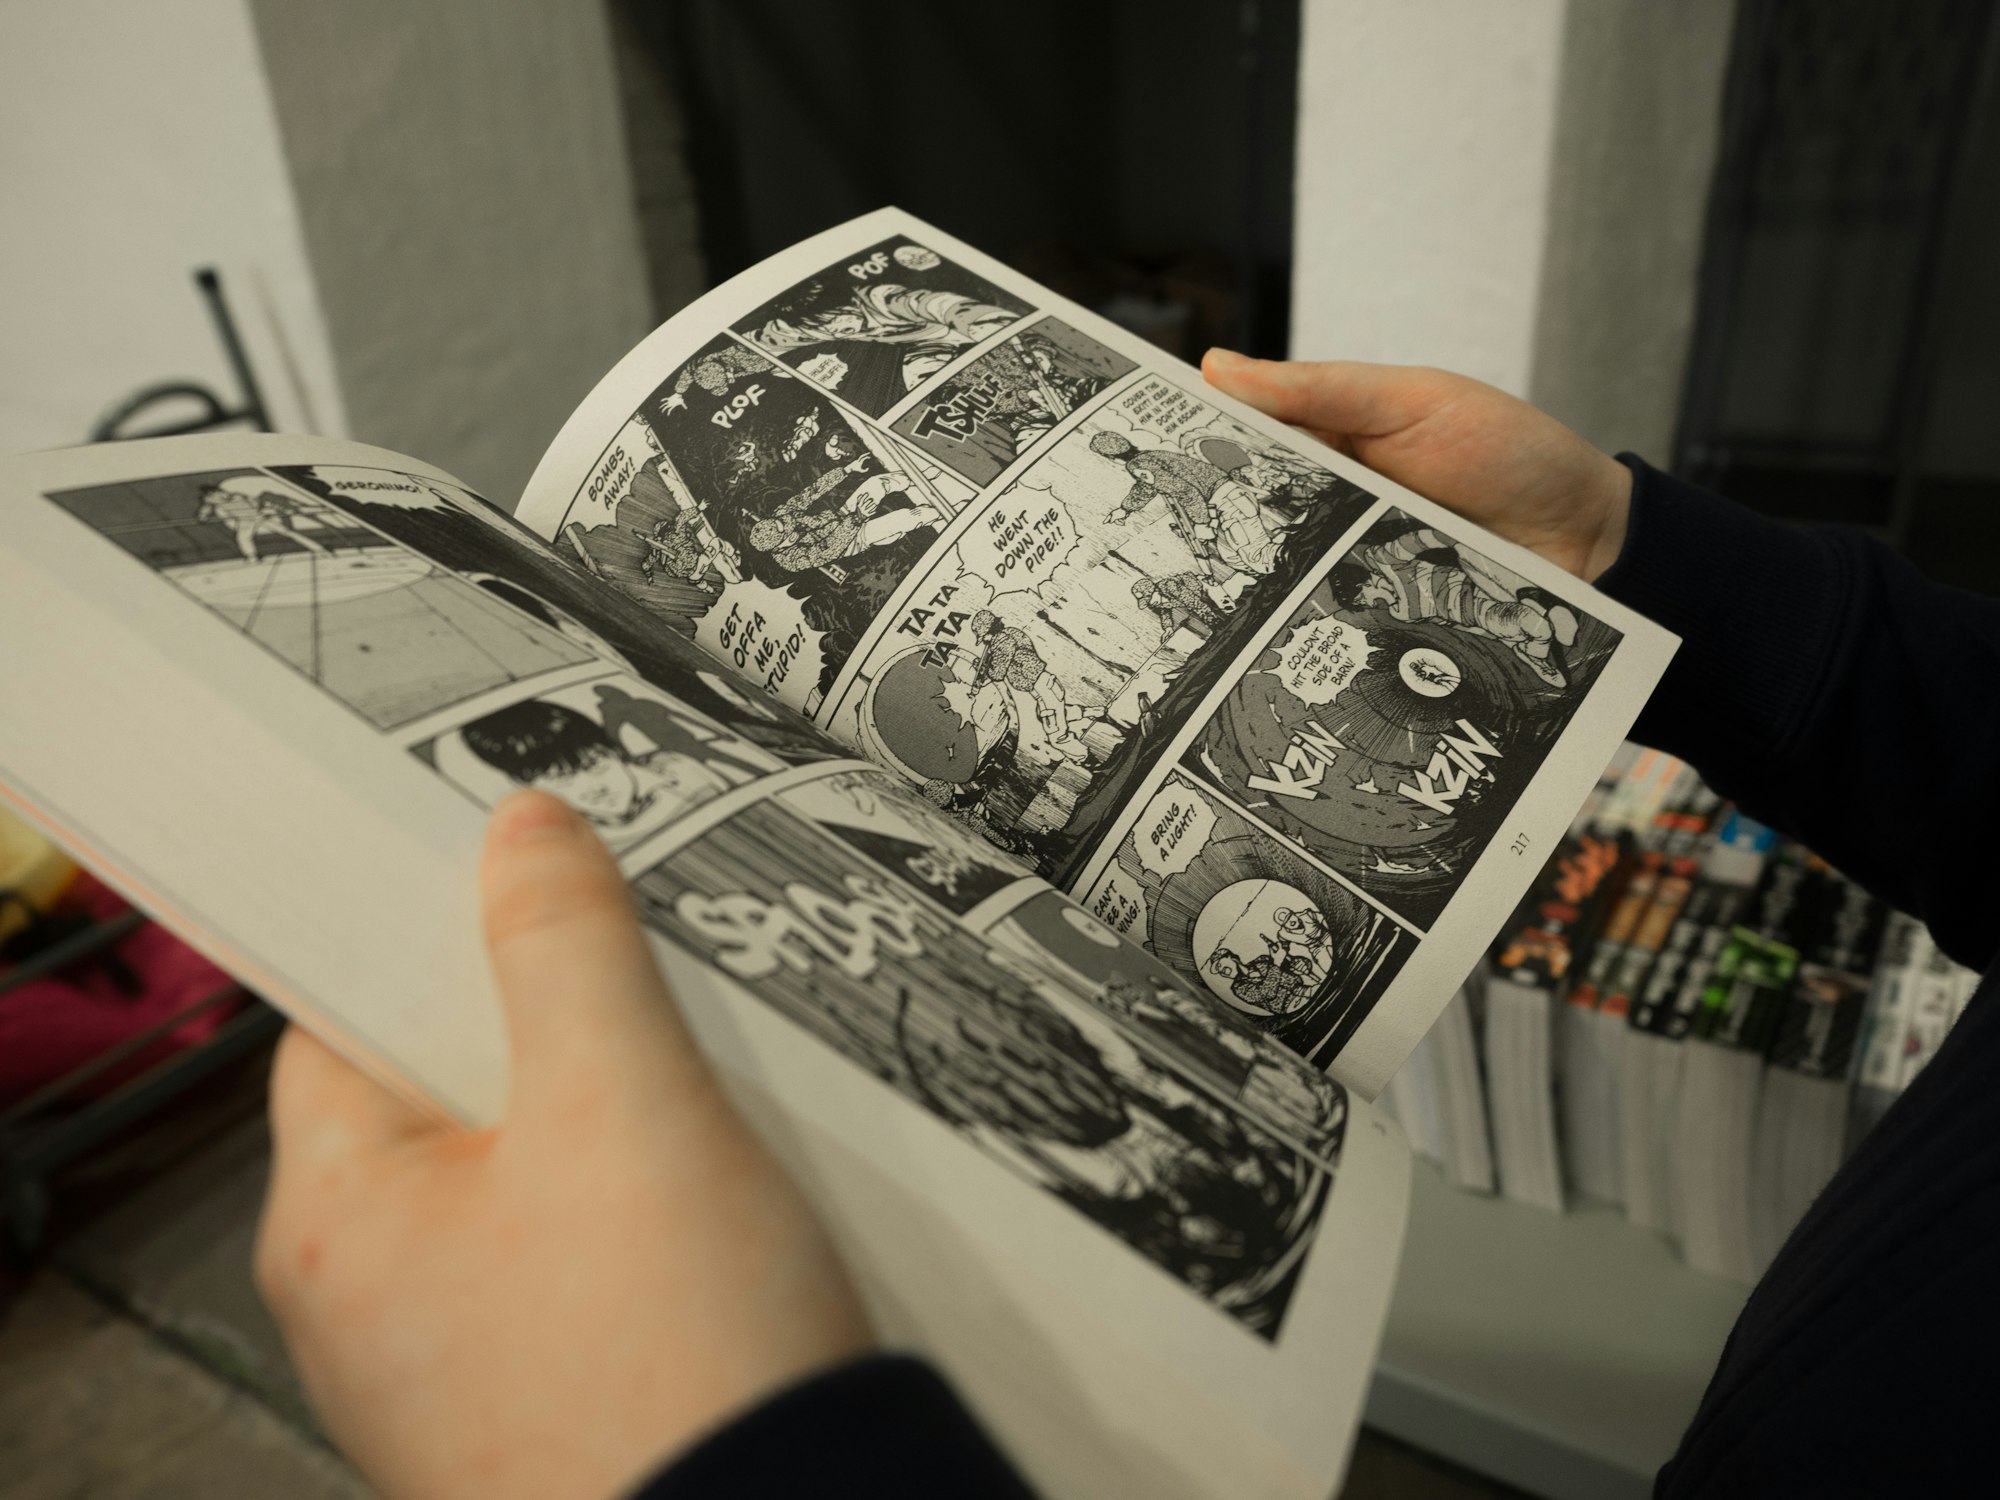 Instantly translate comics in your language